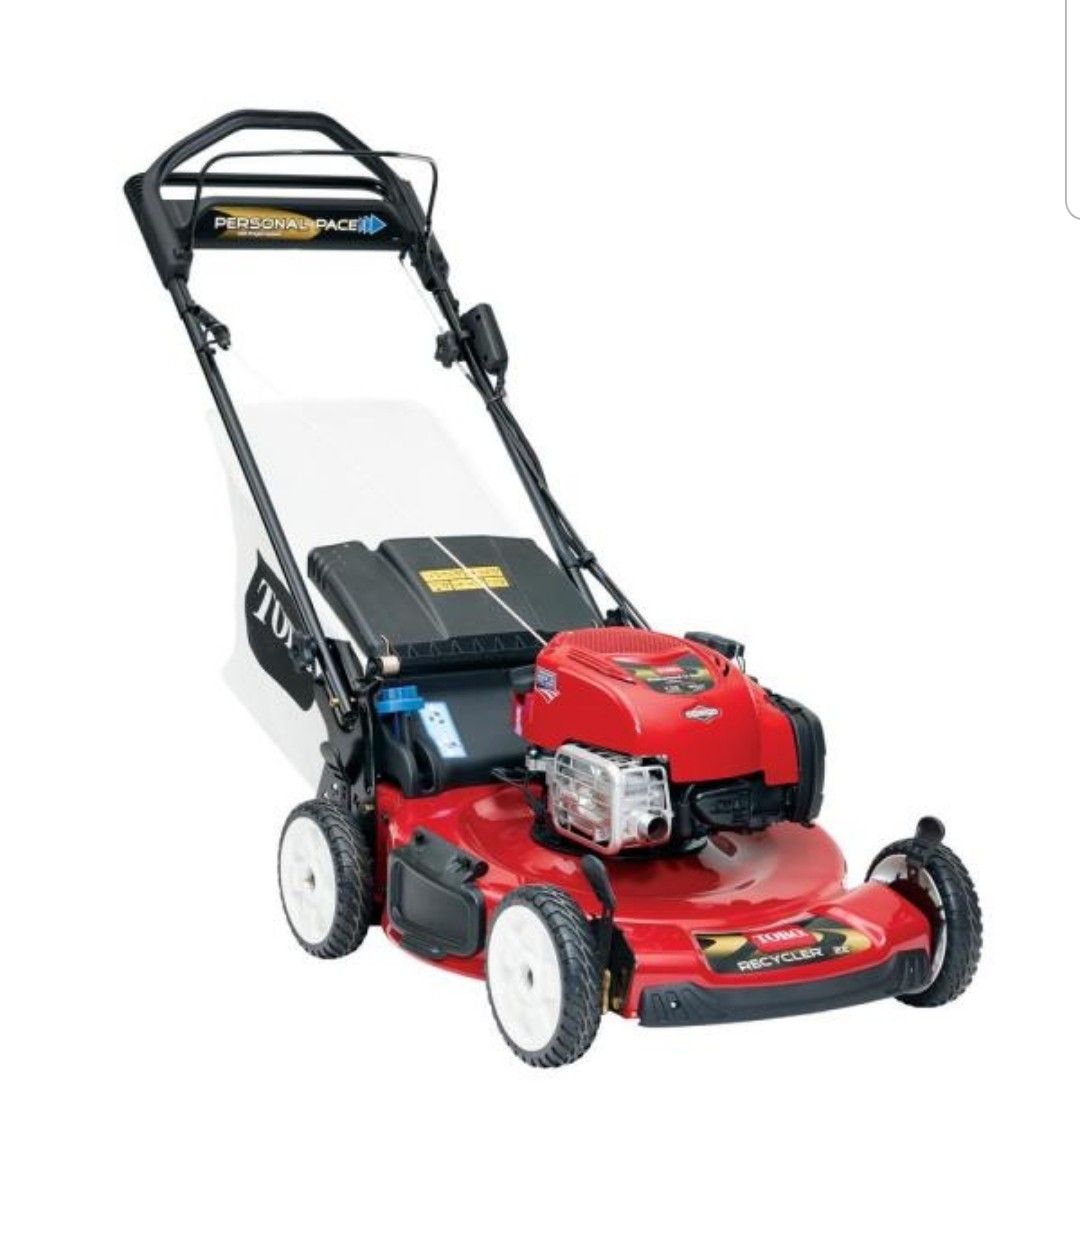 Toro Recycler 22 in. Briggs and Stratton Personal Pace Self Propelled Gas Walk-Behind Lawn Mower with Electric Start